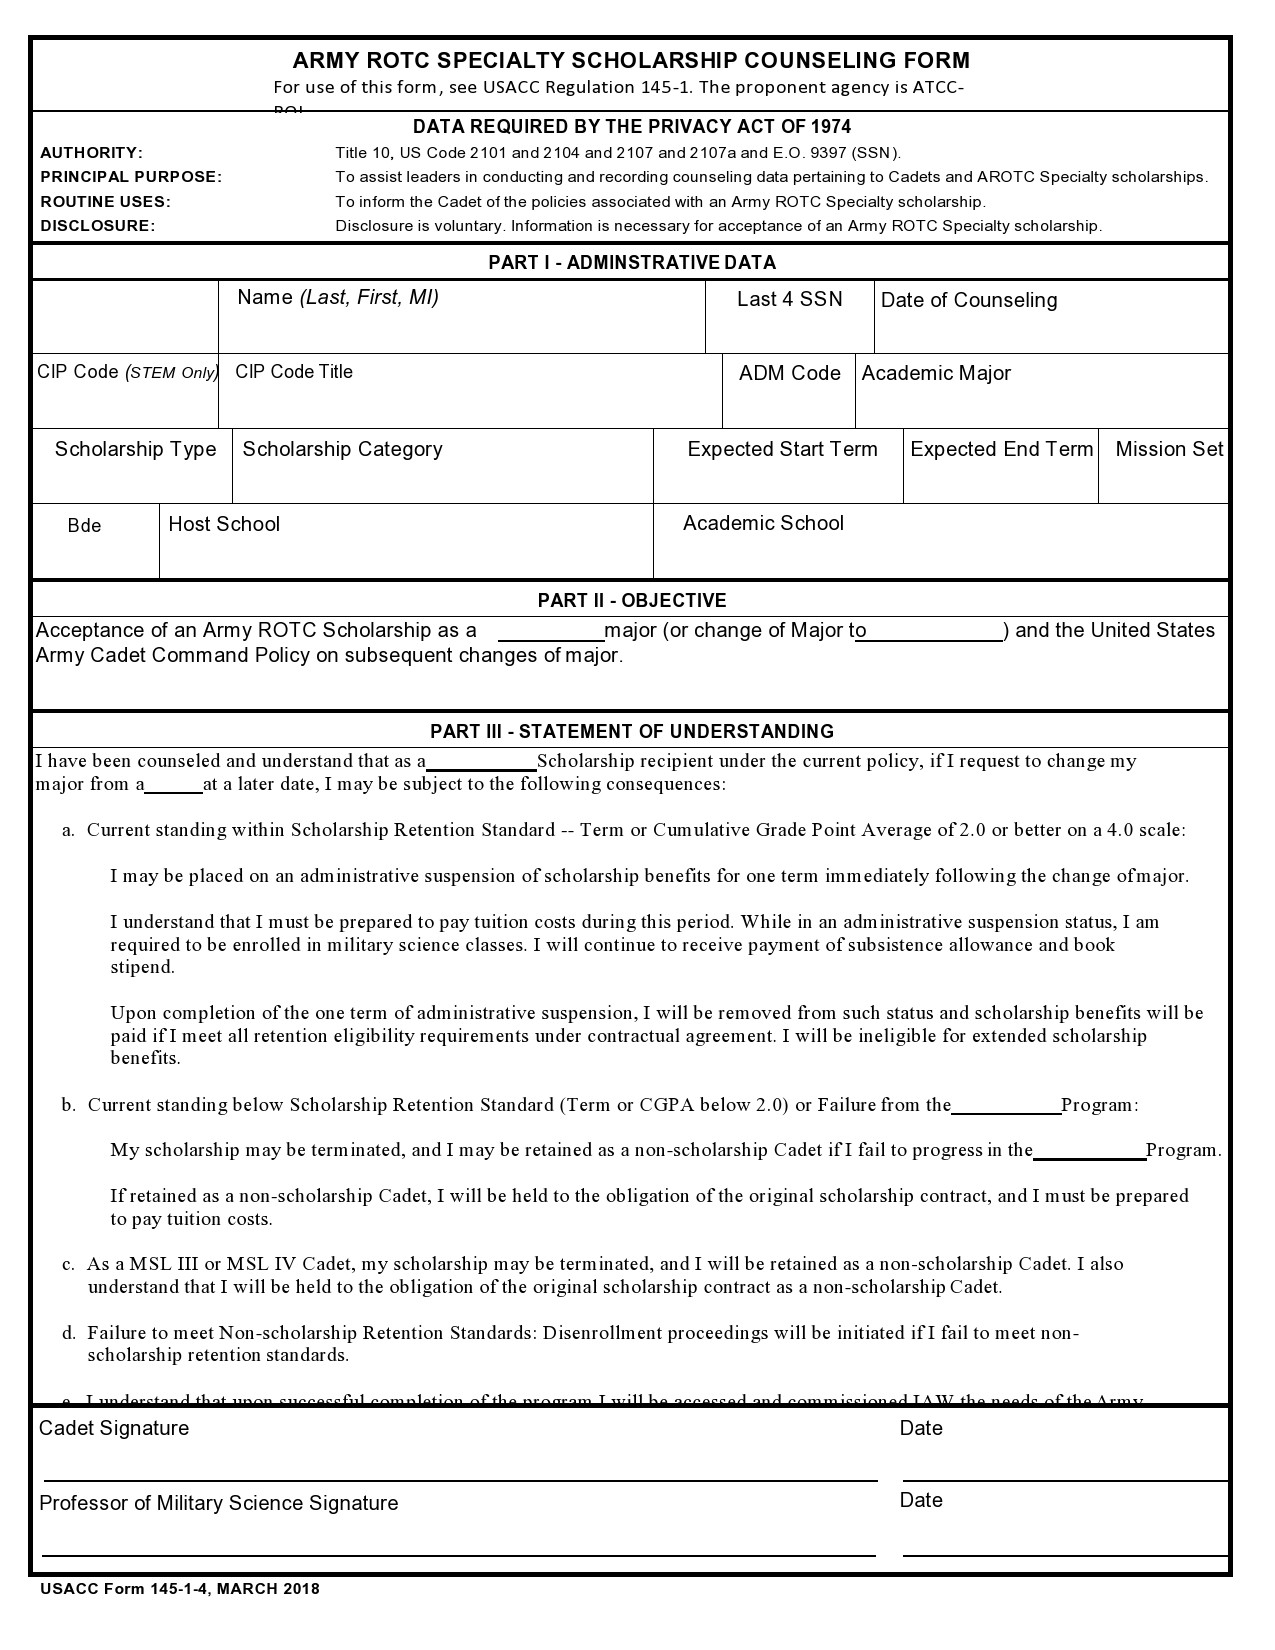 Free army counseling form 04